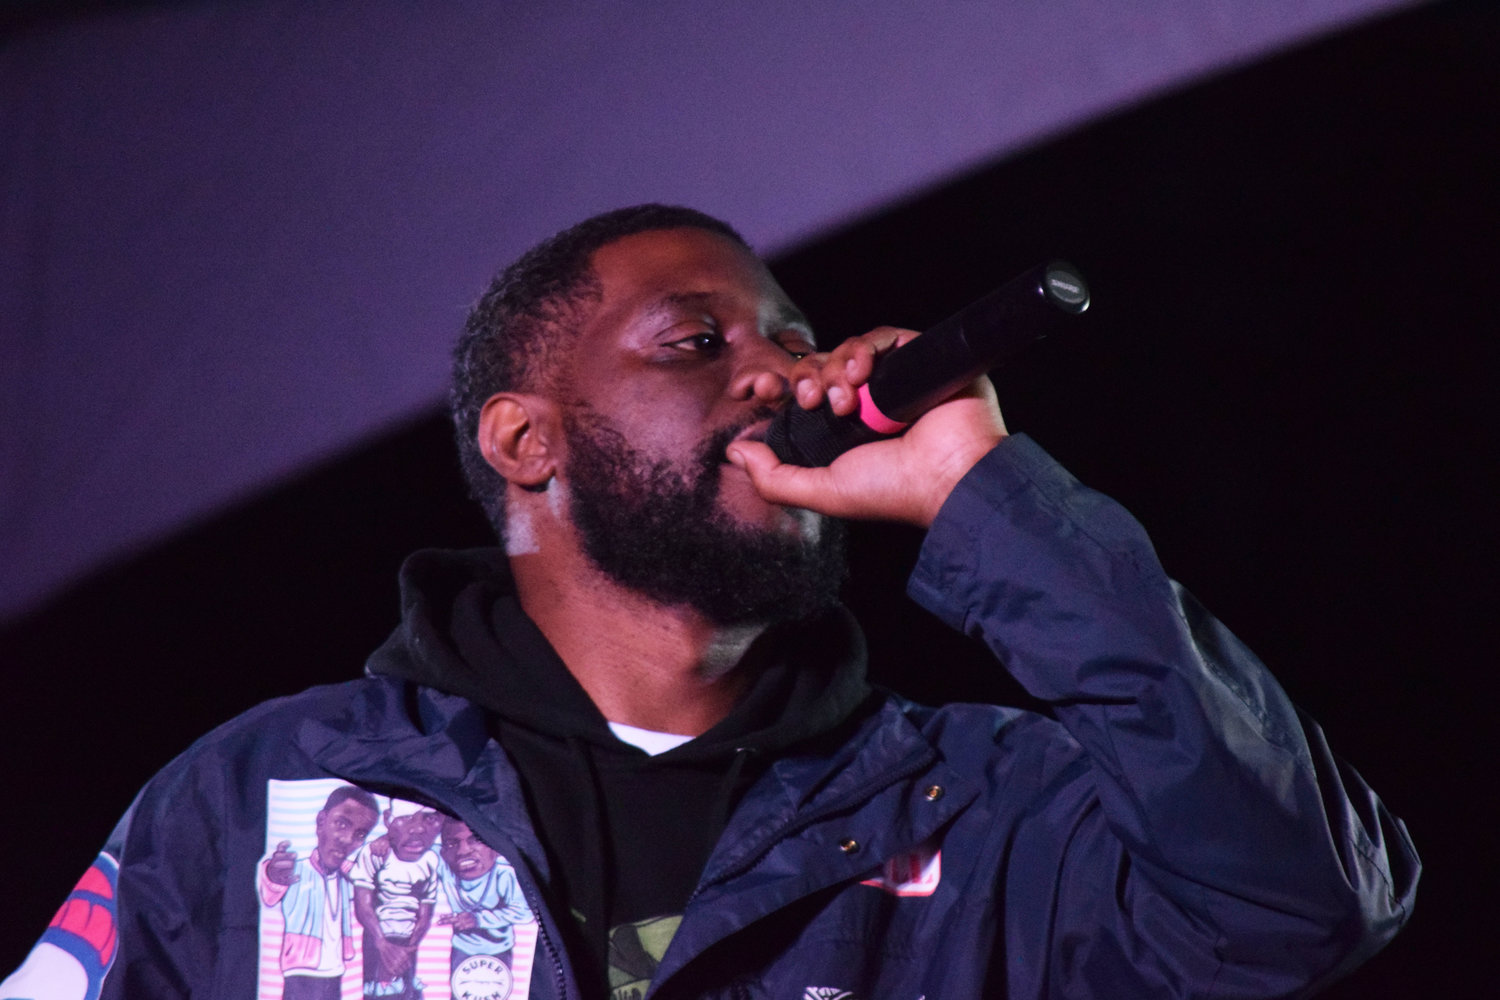 “Rest in peace, George Floyd,” Twin Cities rapper Metasota tells the crowd, “I don’t care what you believe personally. I don’t care how you grew up. No one deserves to die like that.” (Photo by Jill Boogren)